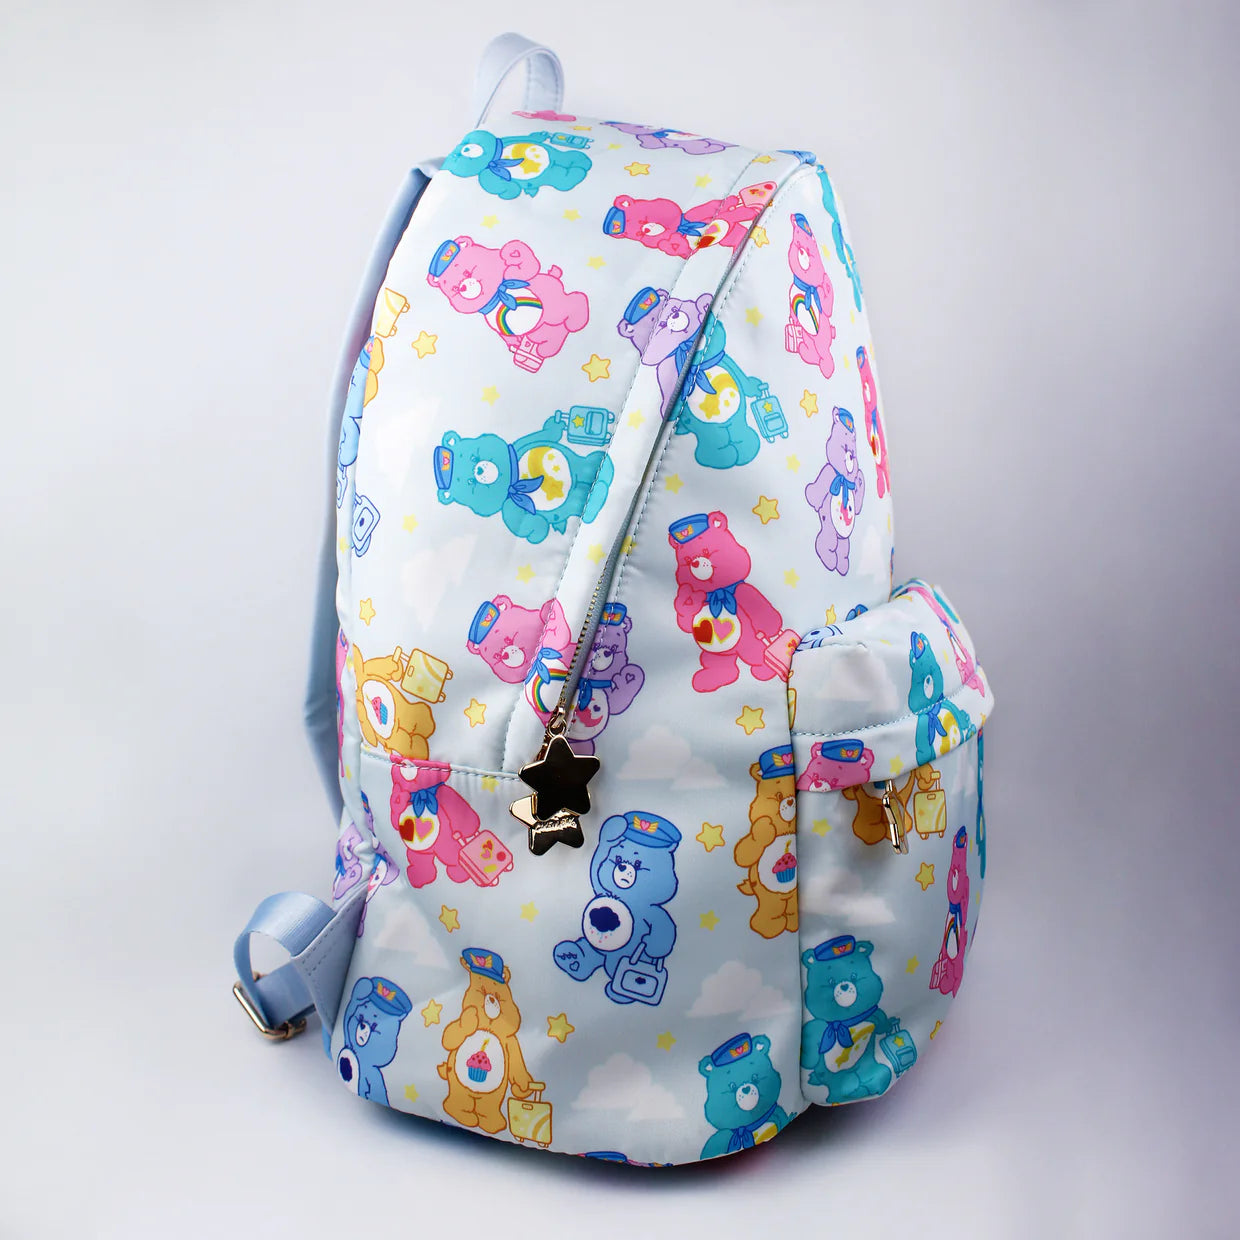 Care Bears Airline Backpack - Cakeworthy